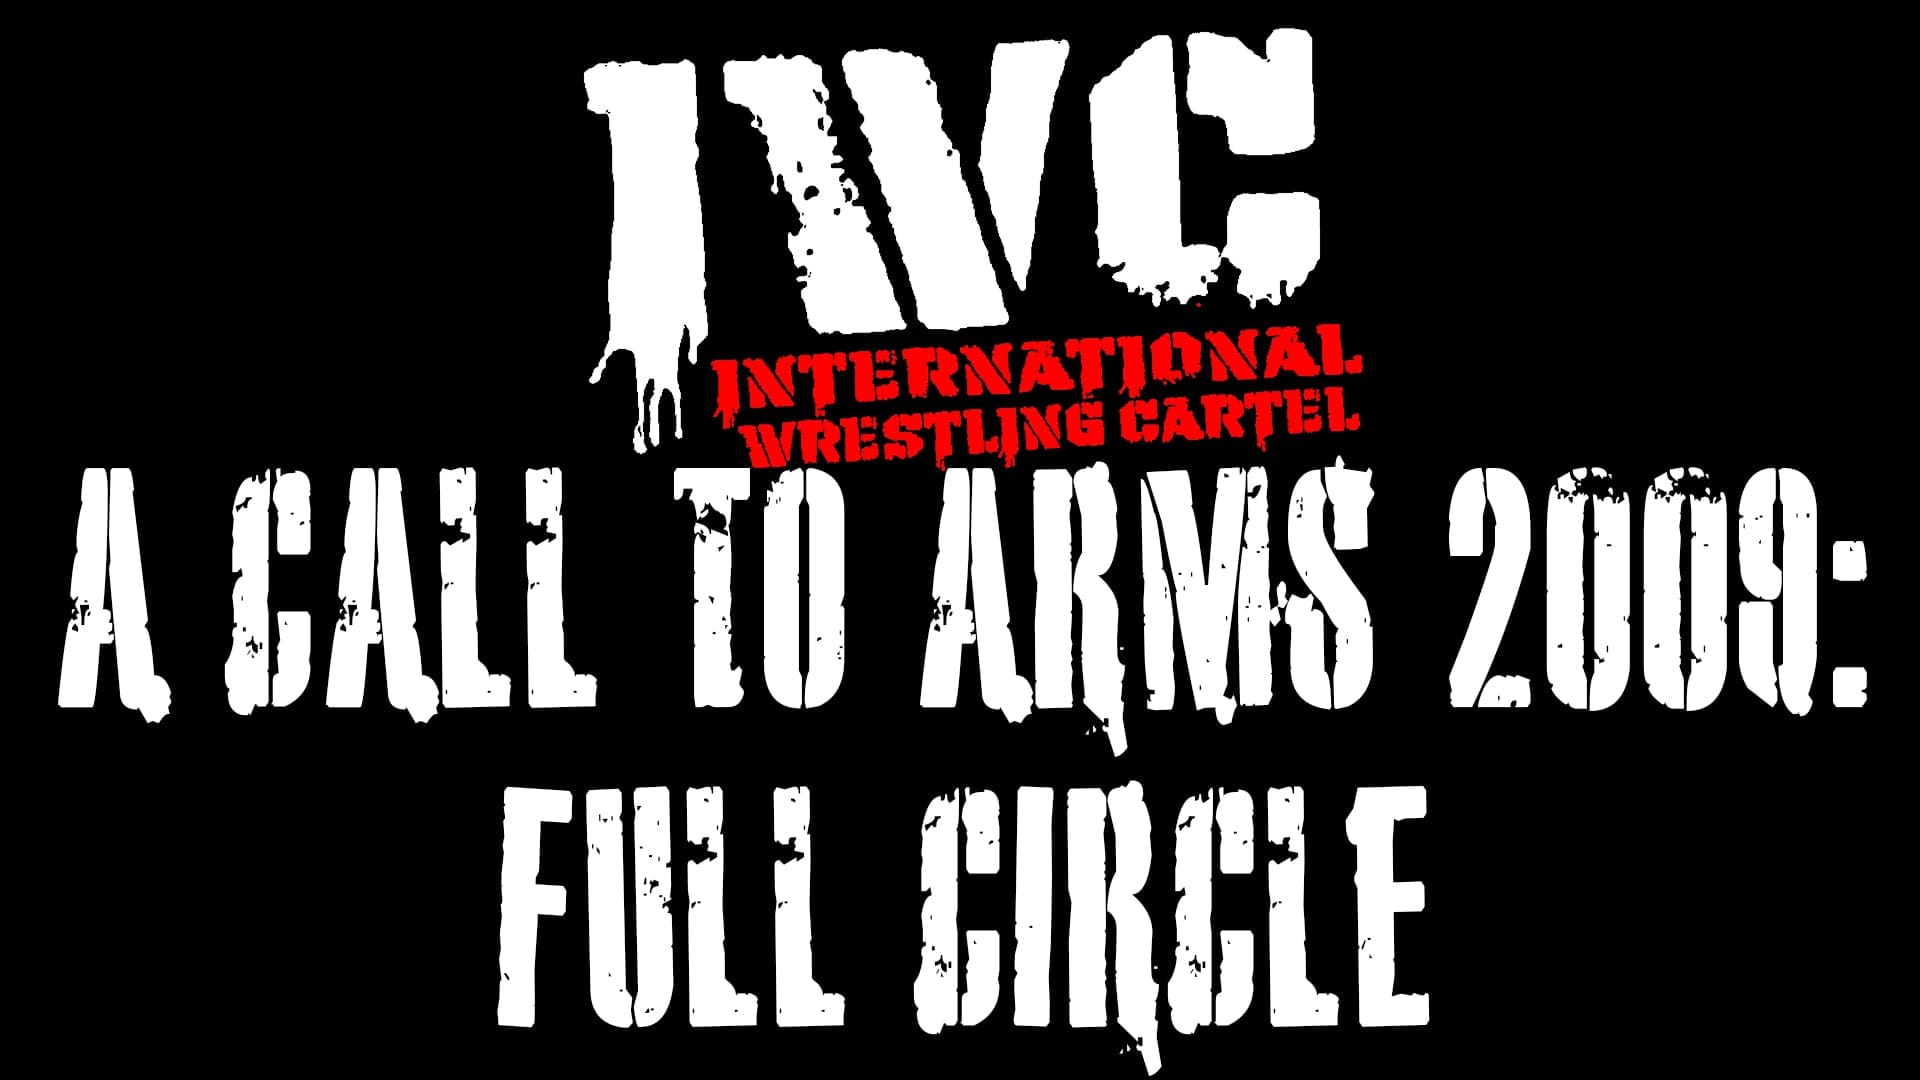 A Call to Arms 2009: Full Circle